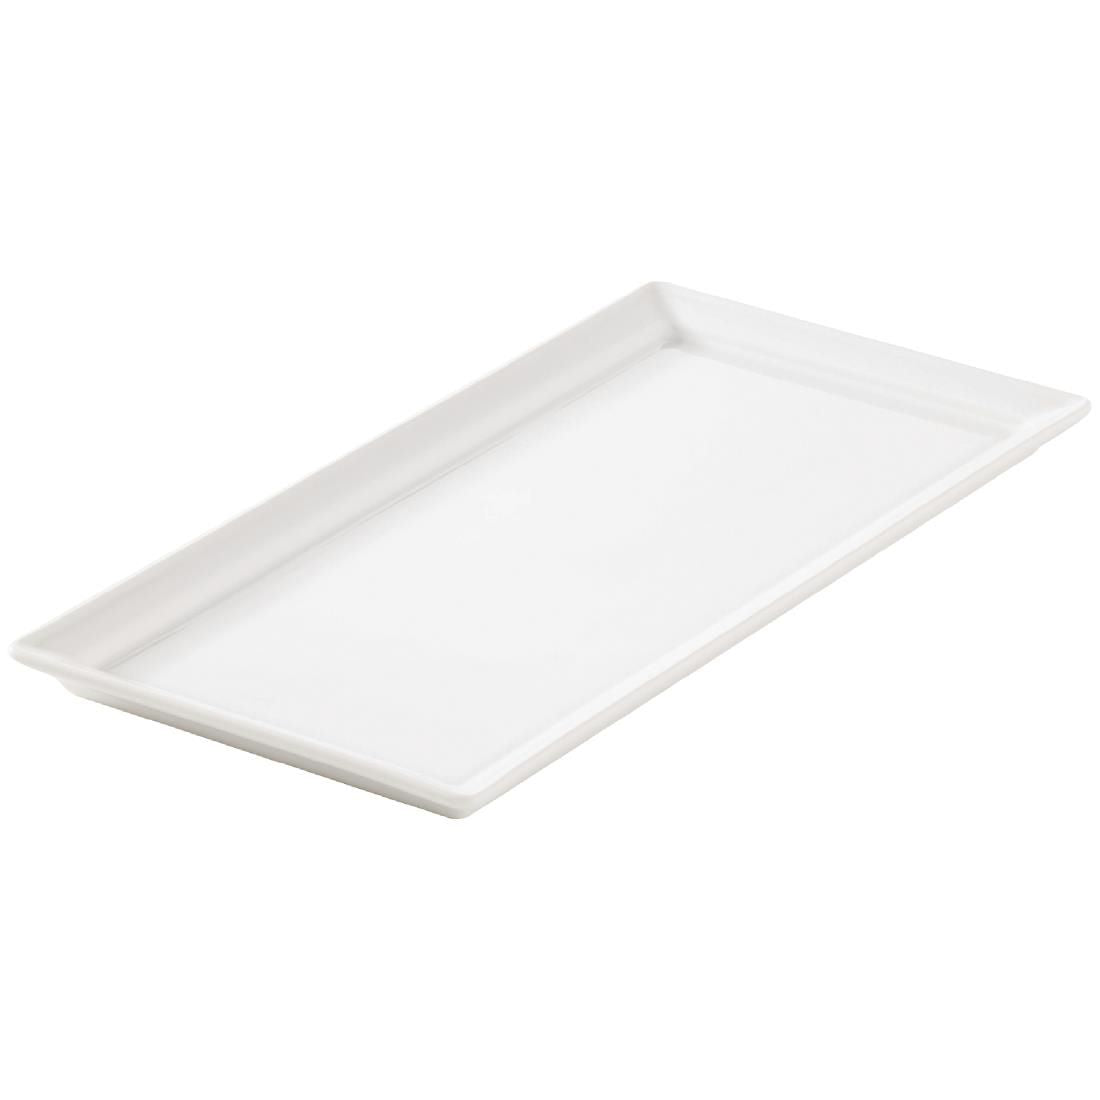 DB424 Revol Time Square Rectangular Trays 263mm (Pack of 6) JD Catering Equipment Solutions Ltd